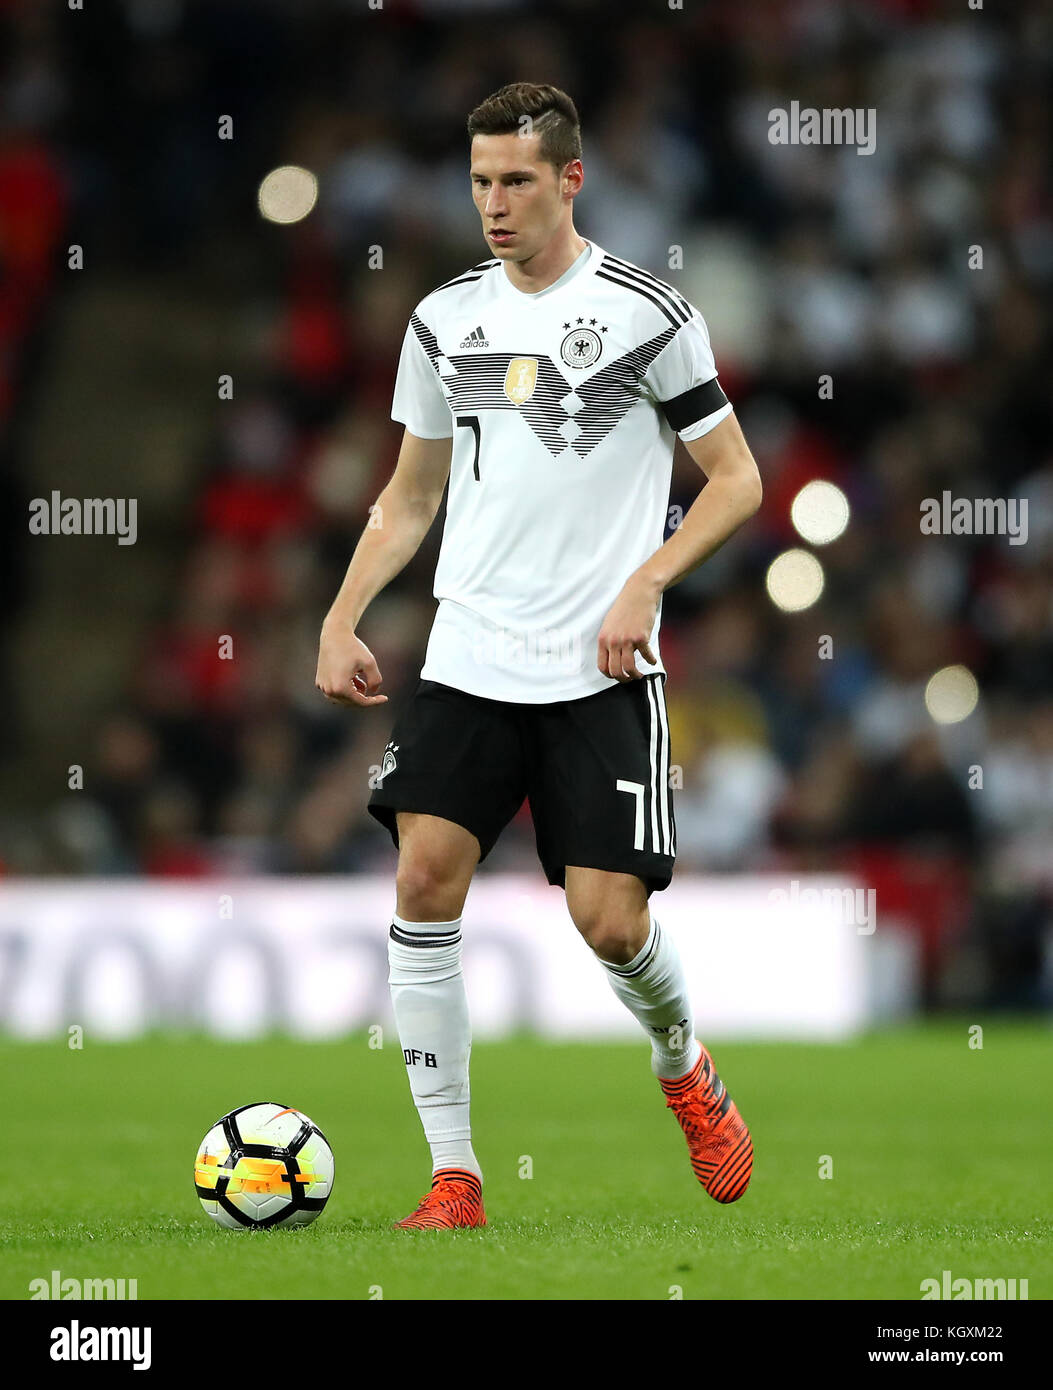 Germany's Julian Draxler during the International Friendly match at Wembley Stadium, London. PRESS ASSOCIATION Photo. Picture date: Friday November 10, 2017. See PA story SOCCER England. Photo credit should read: Nick Potts/PA Wire. RESTRICTIONS: Use subject to FA restrictions. Editorial use only. Commercial use only with prior written consent of the FA. No editing except cropping. Stock Photo